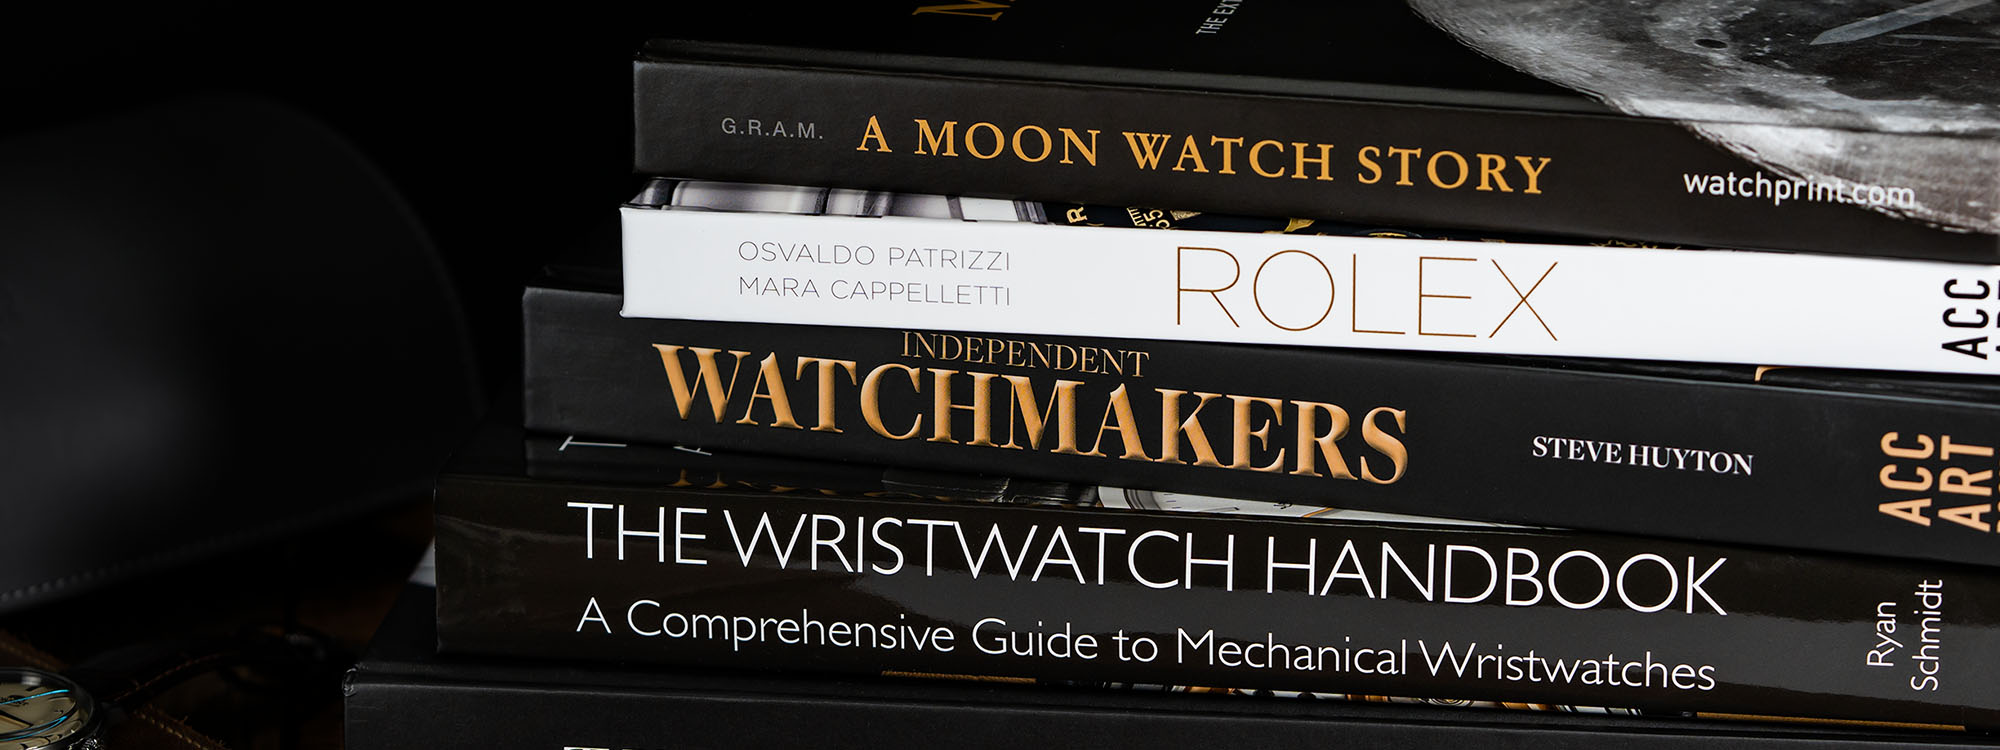 The 11 Best Watch Books Every Collector Should Read